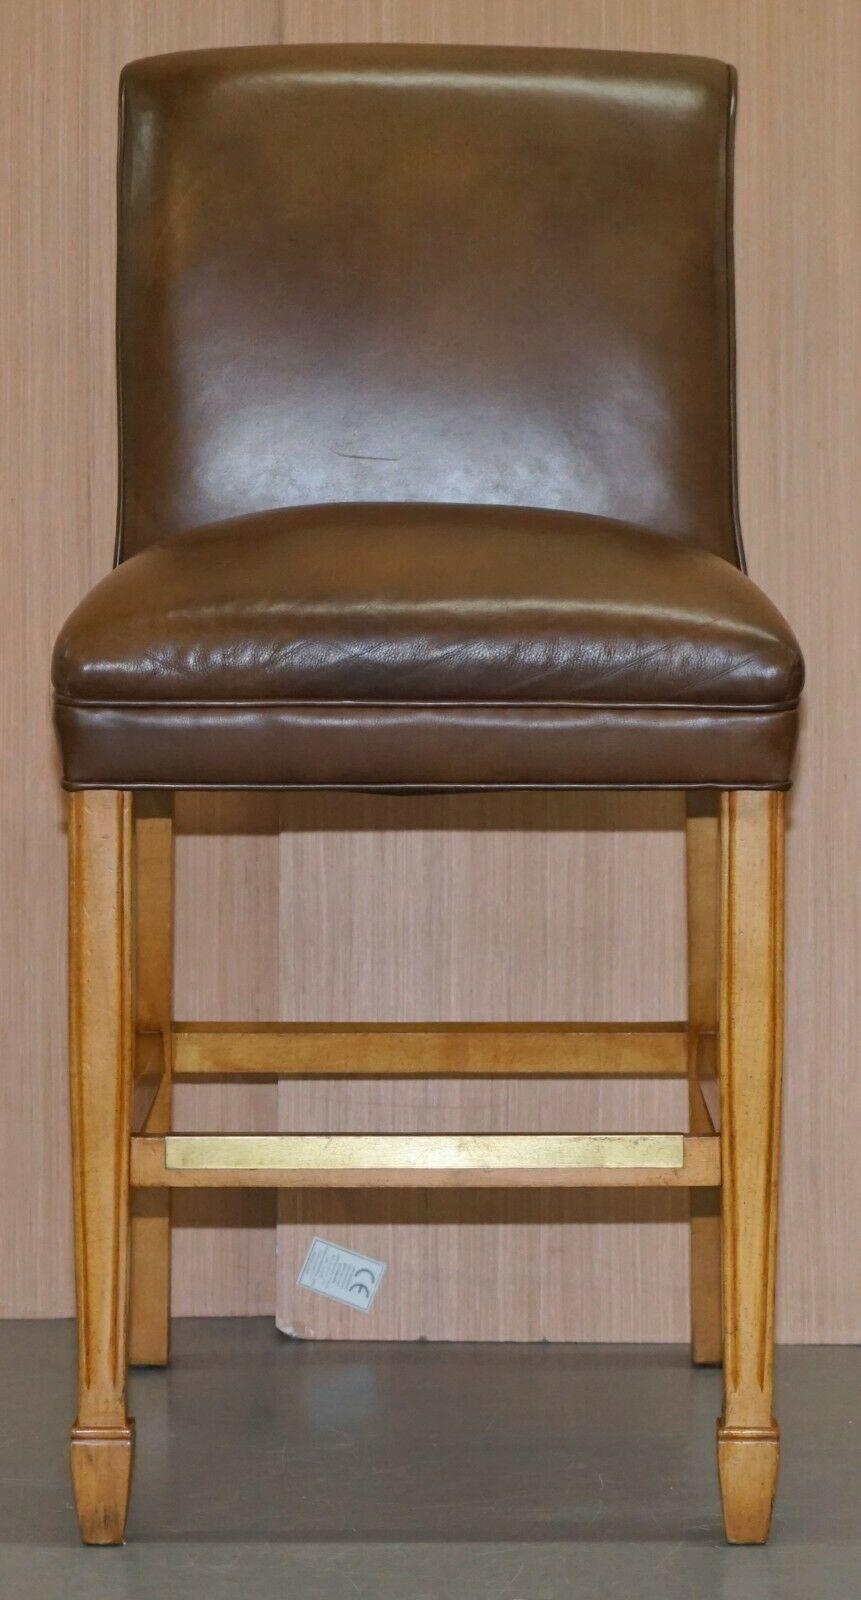 We are delighted to offer for sale this set of 4 hand dyed brown leather high light mahogany bar stools by Hancock & Moore

They are absolutely sublime quality, the line of the timber when looking from the back is amazing, they have metal footrest